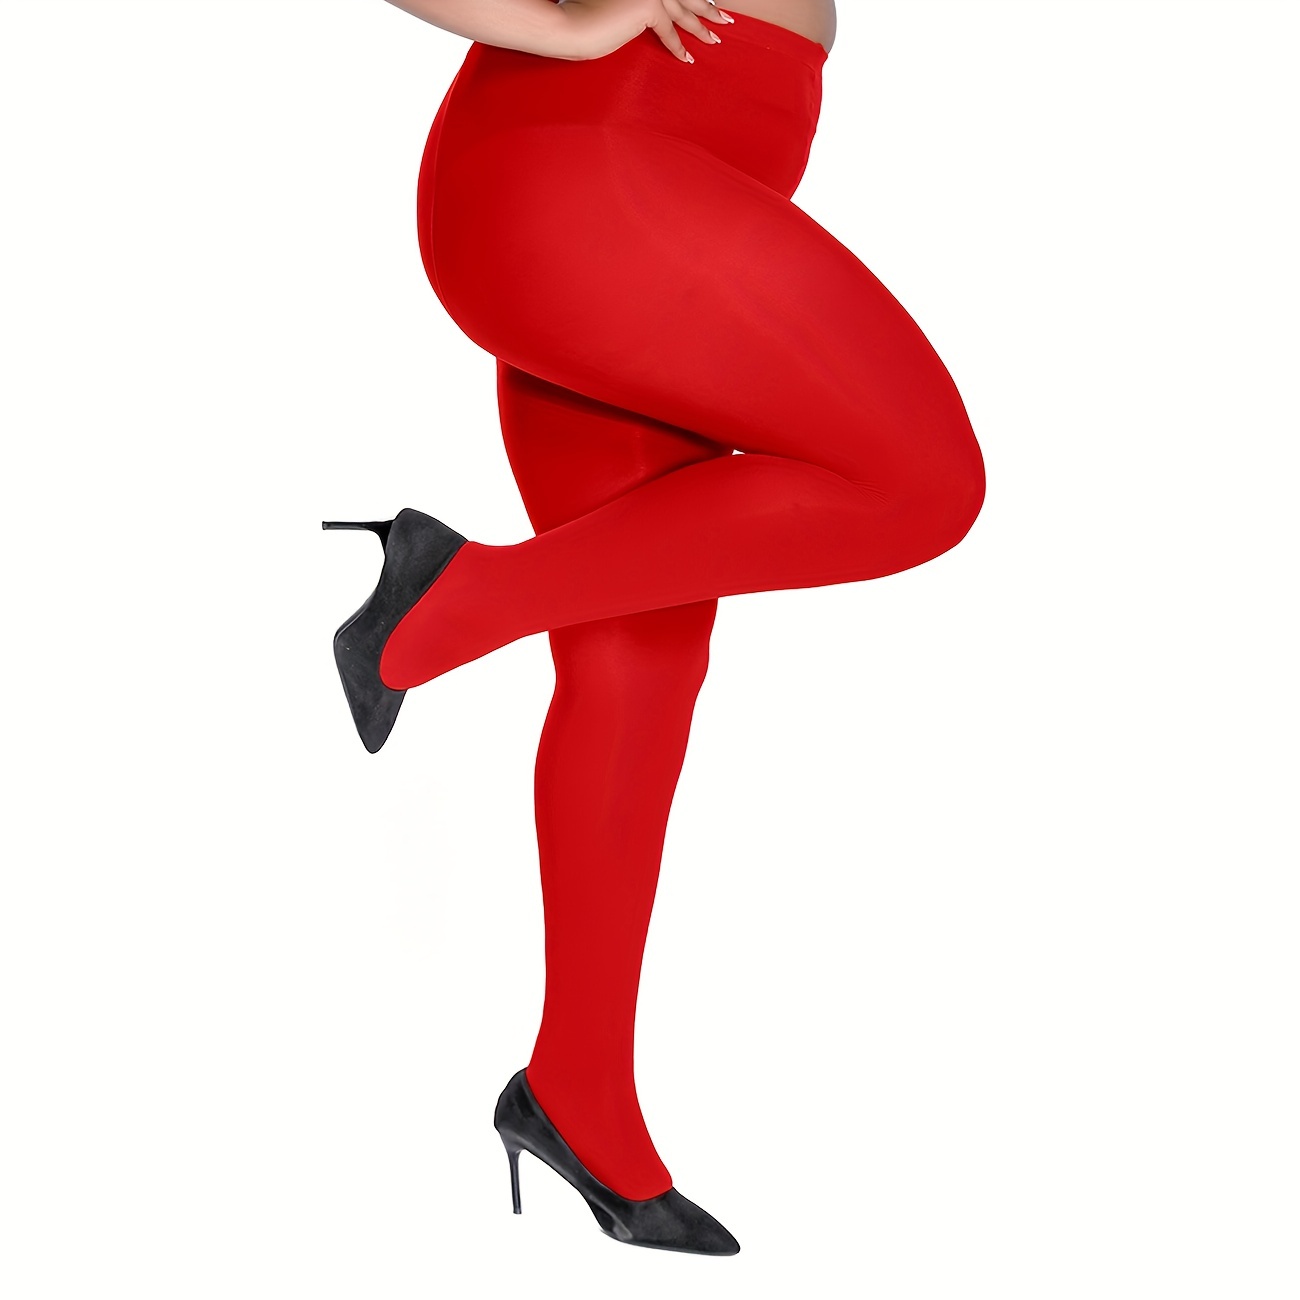 Ultra Plus Size Tights for Women Up To 6x, Semi Opaque Control Top Nylon  Pantyhose,High Waist Fashion Stockings